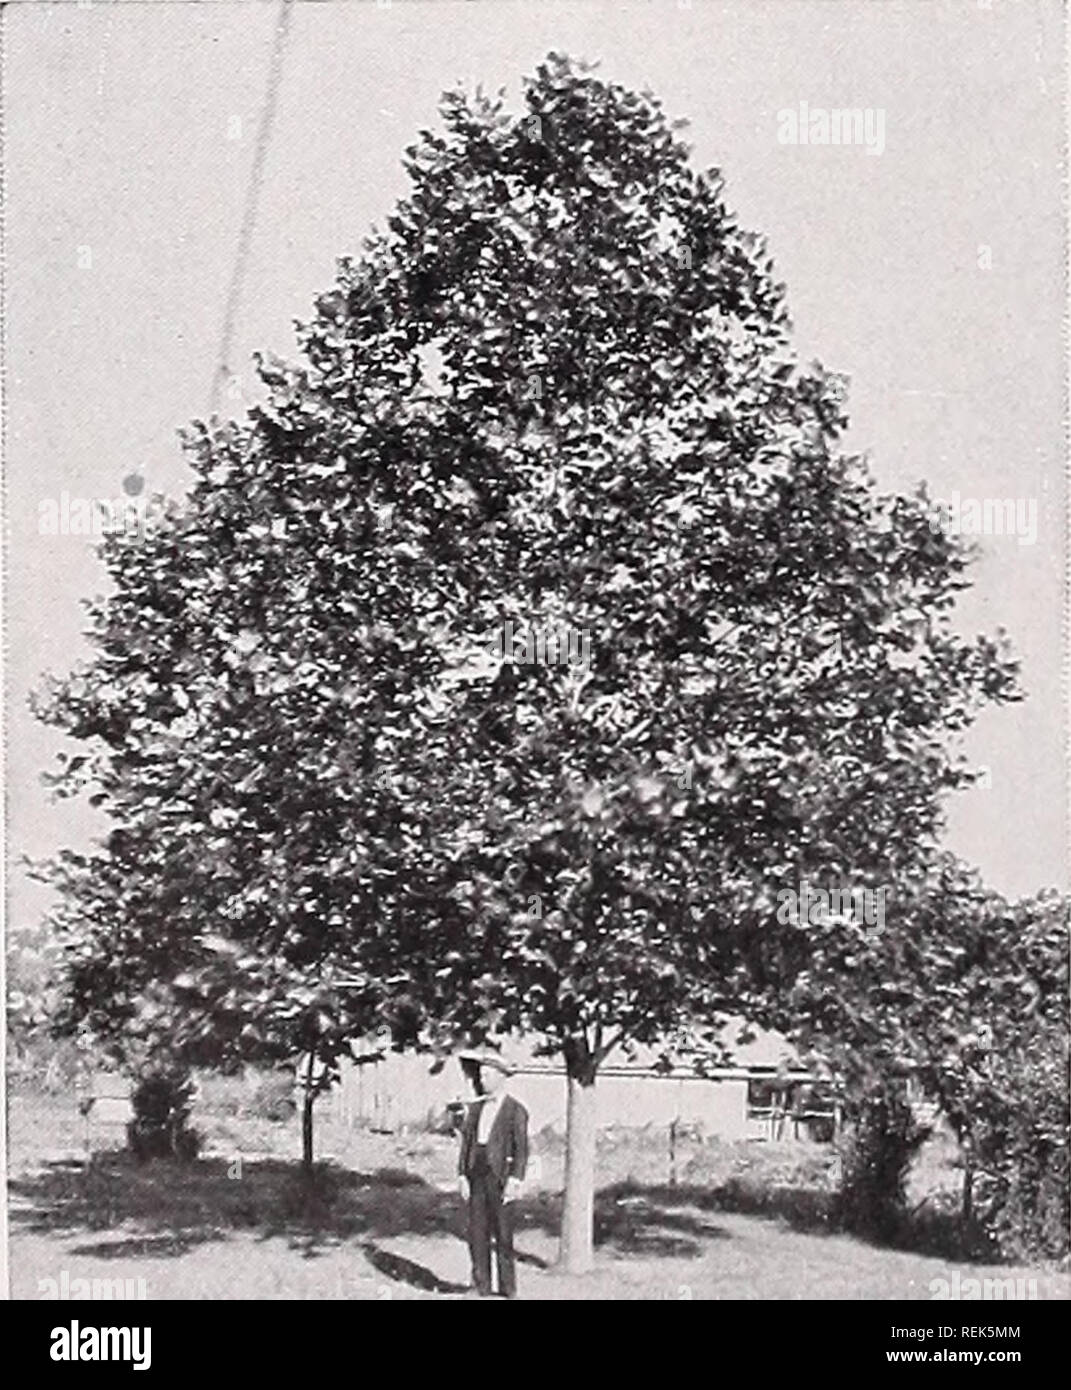 . C. M. Hobbs &amp; Sons. Nurseries Horticulture Catalogs; Evergreens Catalogs; Fruit trees Catalogs; Climbing plants Catalogs; Shrubs Catalogs; Flowers Catalogs; Vegetables Catalogs. DOGWOOD BLOSSOMS. European Linden (T. Europea)—A very fine pyramidal tree of large size with large leaves and fragrant flowers; the leaves change in the fall to beautiful tones of yellow and brown. European Broad Leaved Linden (T. var. plati- phylla)—A tree about the same size as above, but distinguished by its larger and rougher leaves and more regular growth. Silver Leaved Linden (T. Argentea)—Showy, heart-shap Stock Photo